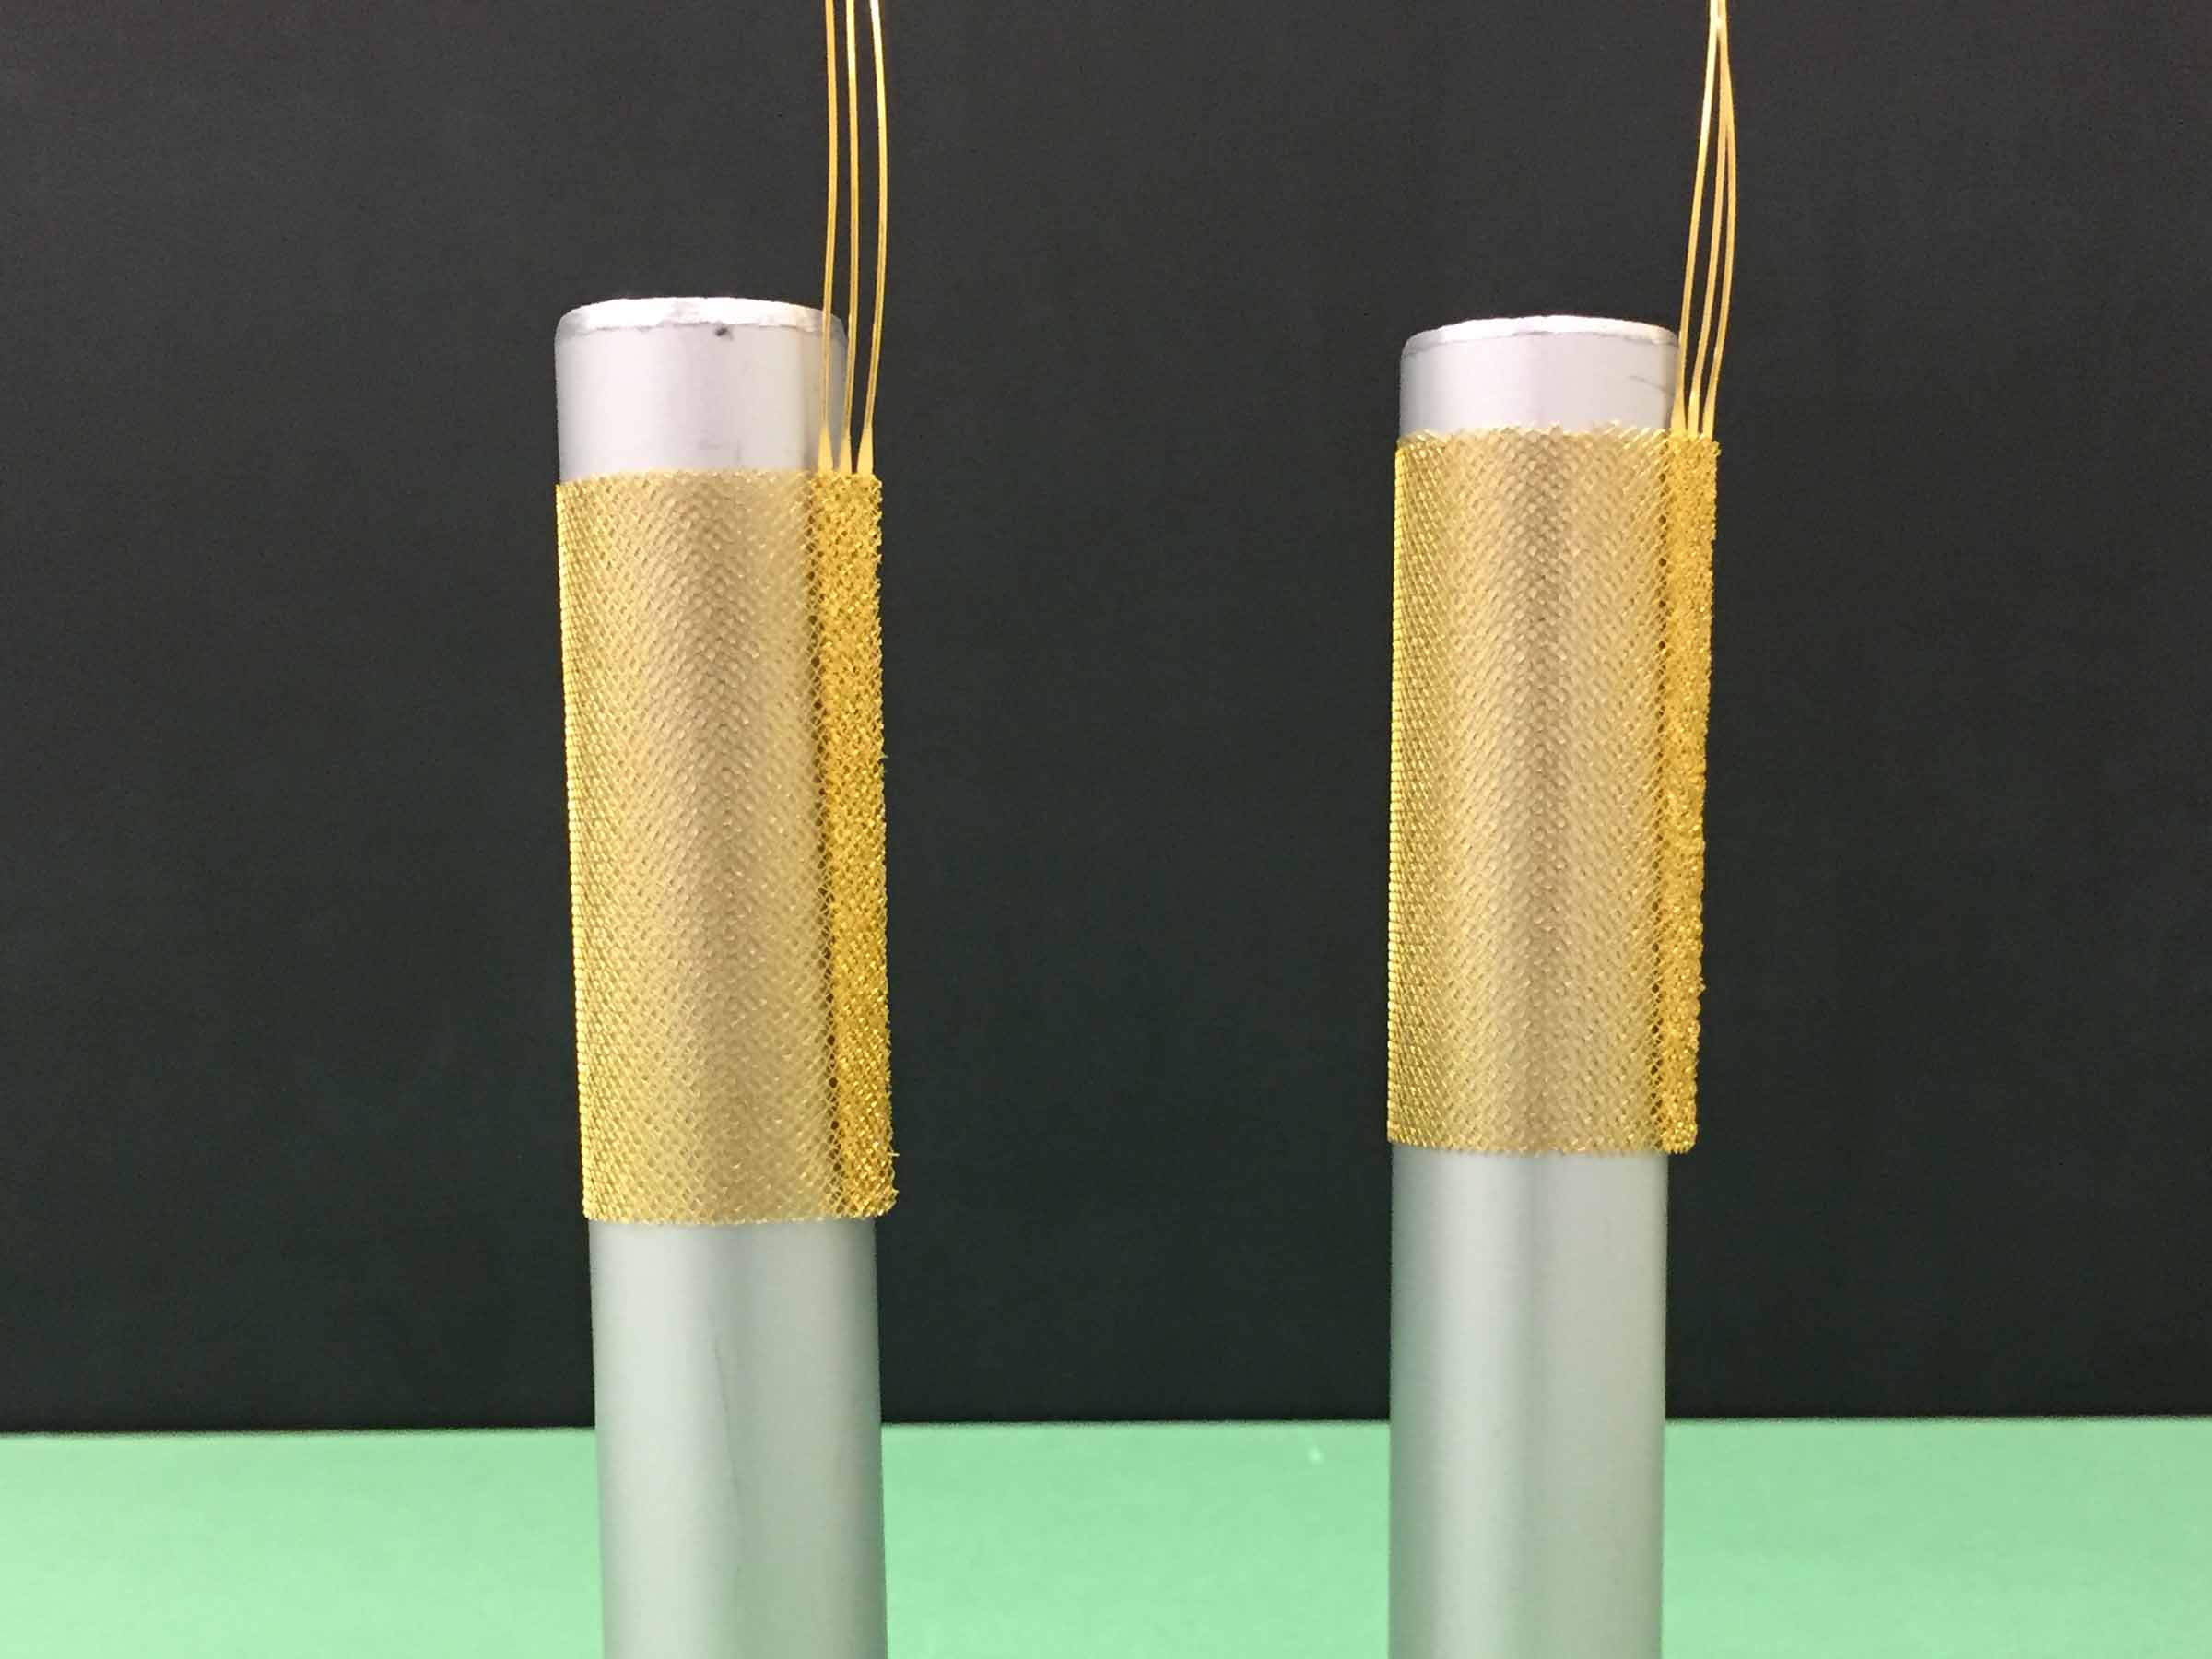 Gold_grid_2_tubular_basket_mesh_gauze_fabric_platinum_silver_SOFC_test_PEM_wet_electrochemistry_counter_electrodes_fuel_cell_wire_fil_platine_pt_or_au_toile_tissu_ideal_curr_collect_manufacturer_fabricant_supplier_heraeus_advent_goodfellows_AlfaAesar.jpg